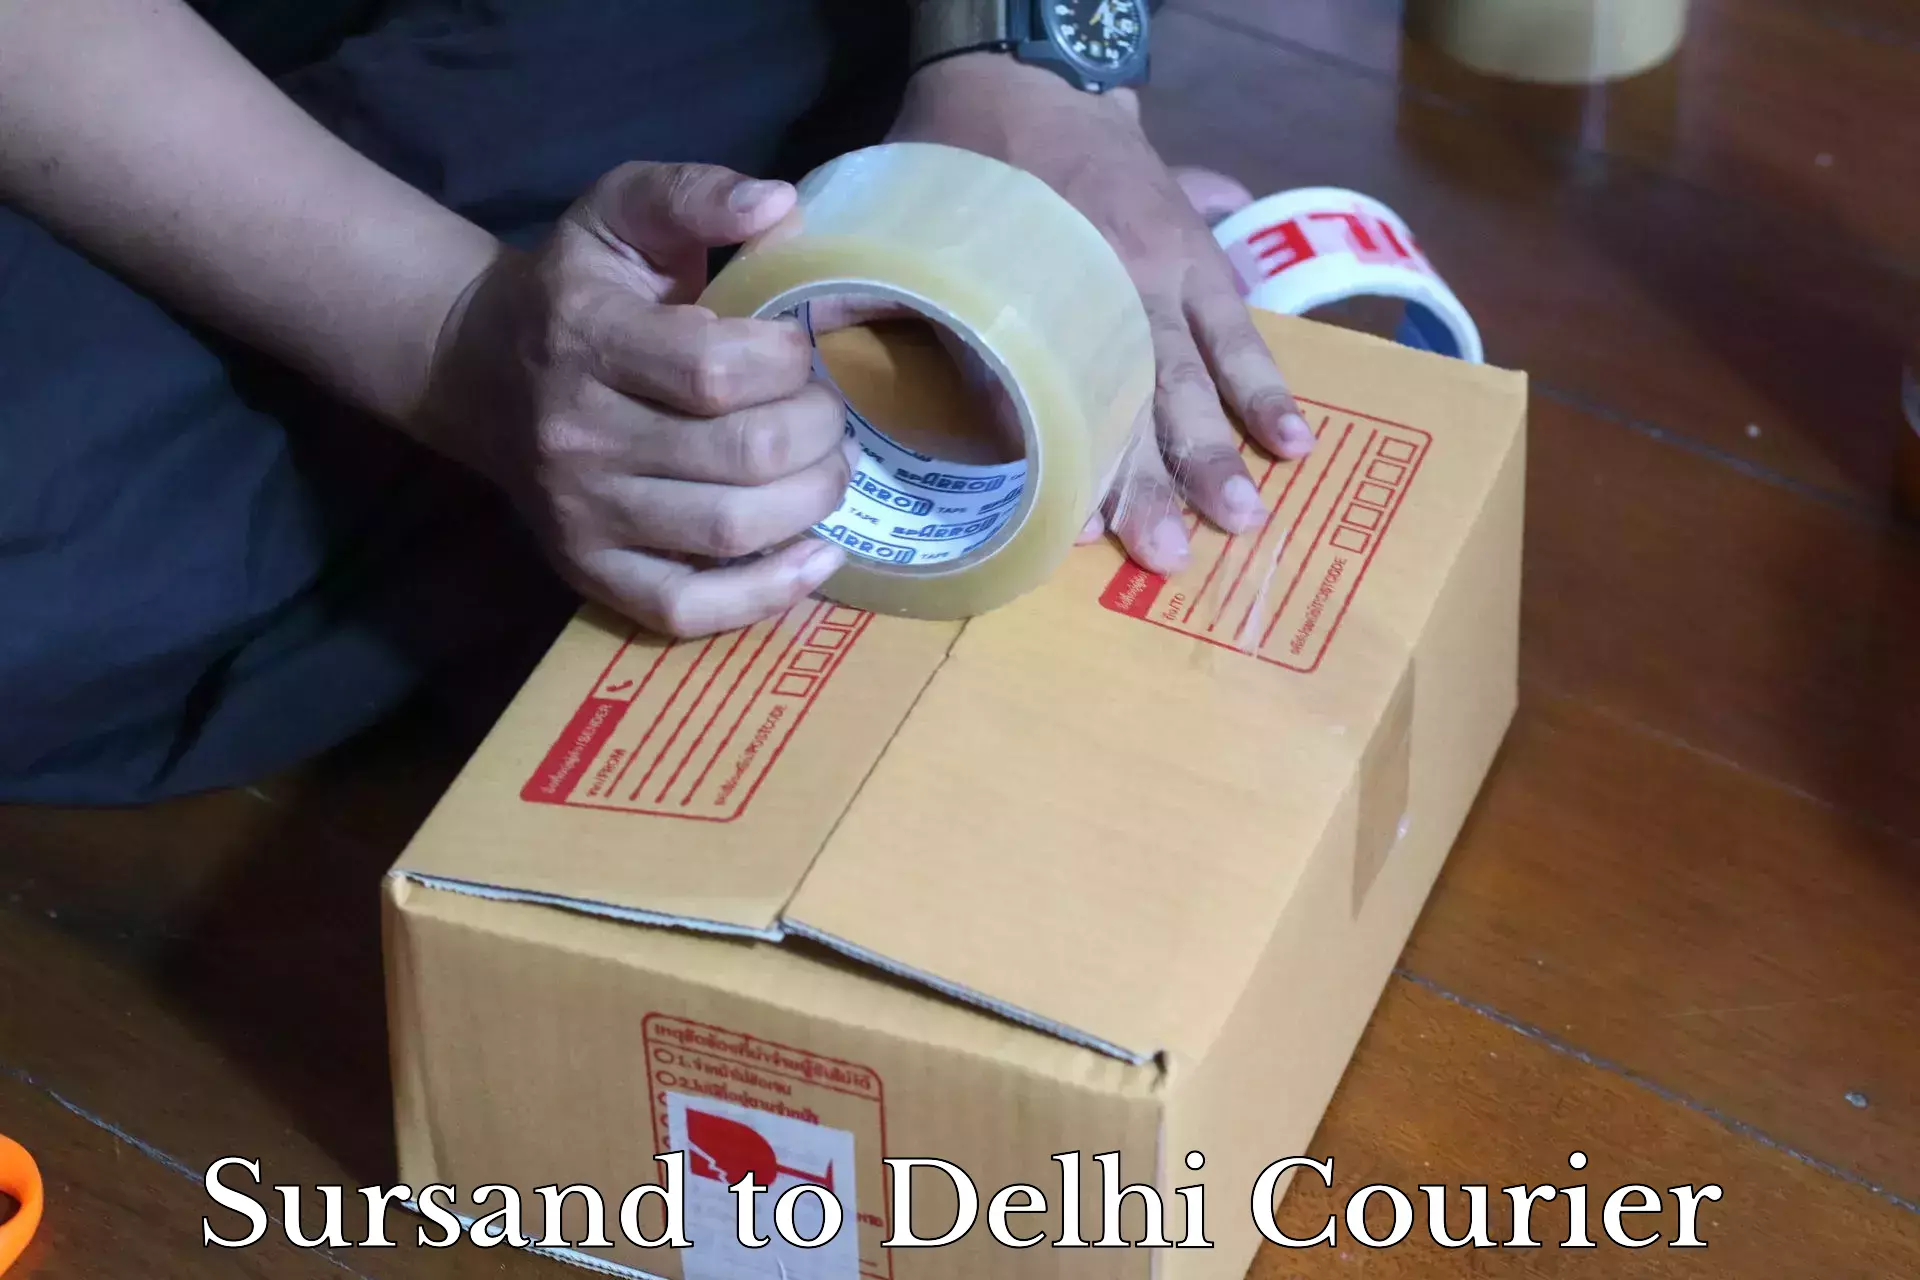 Flexible delivery schedules Sursand to East Delhi